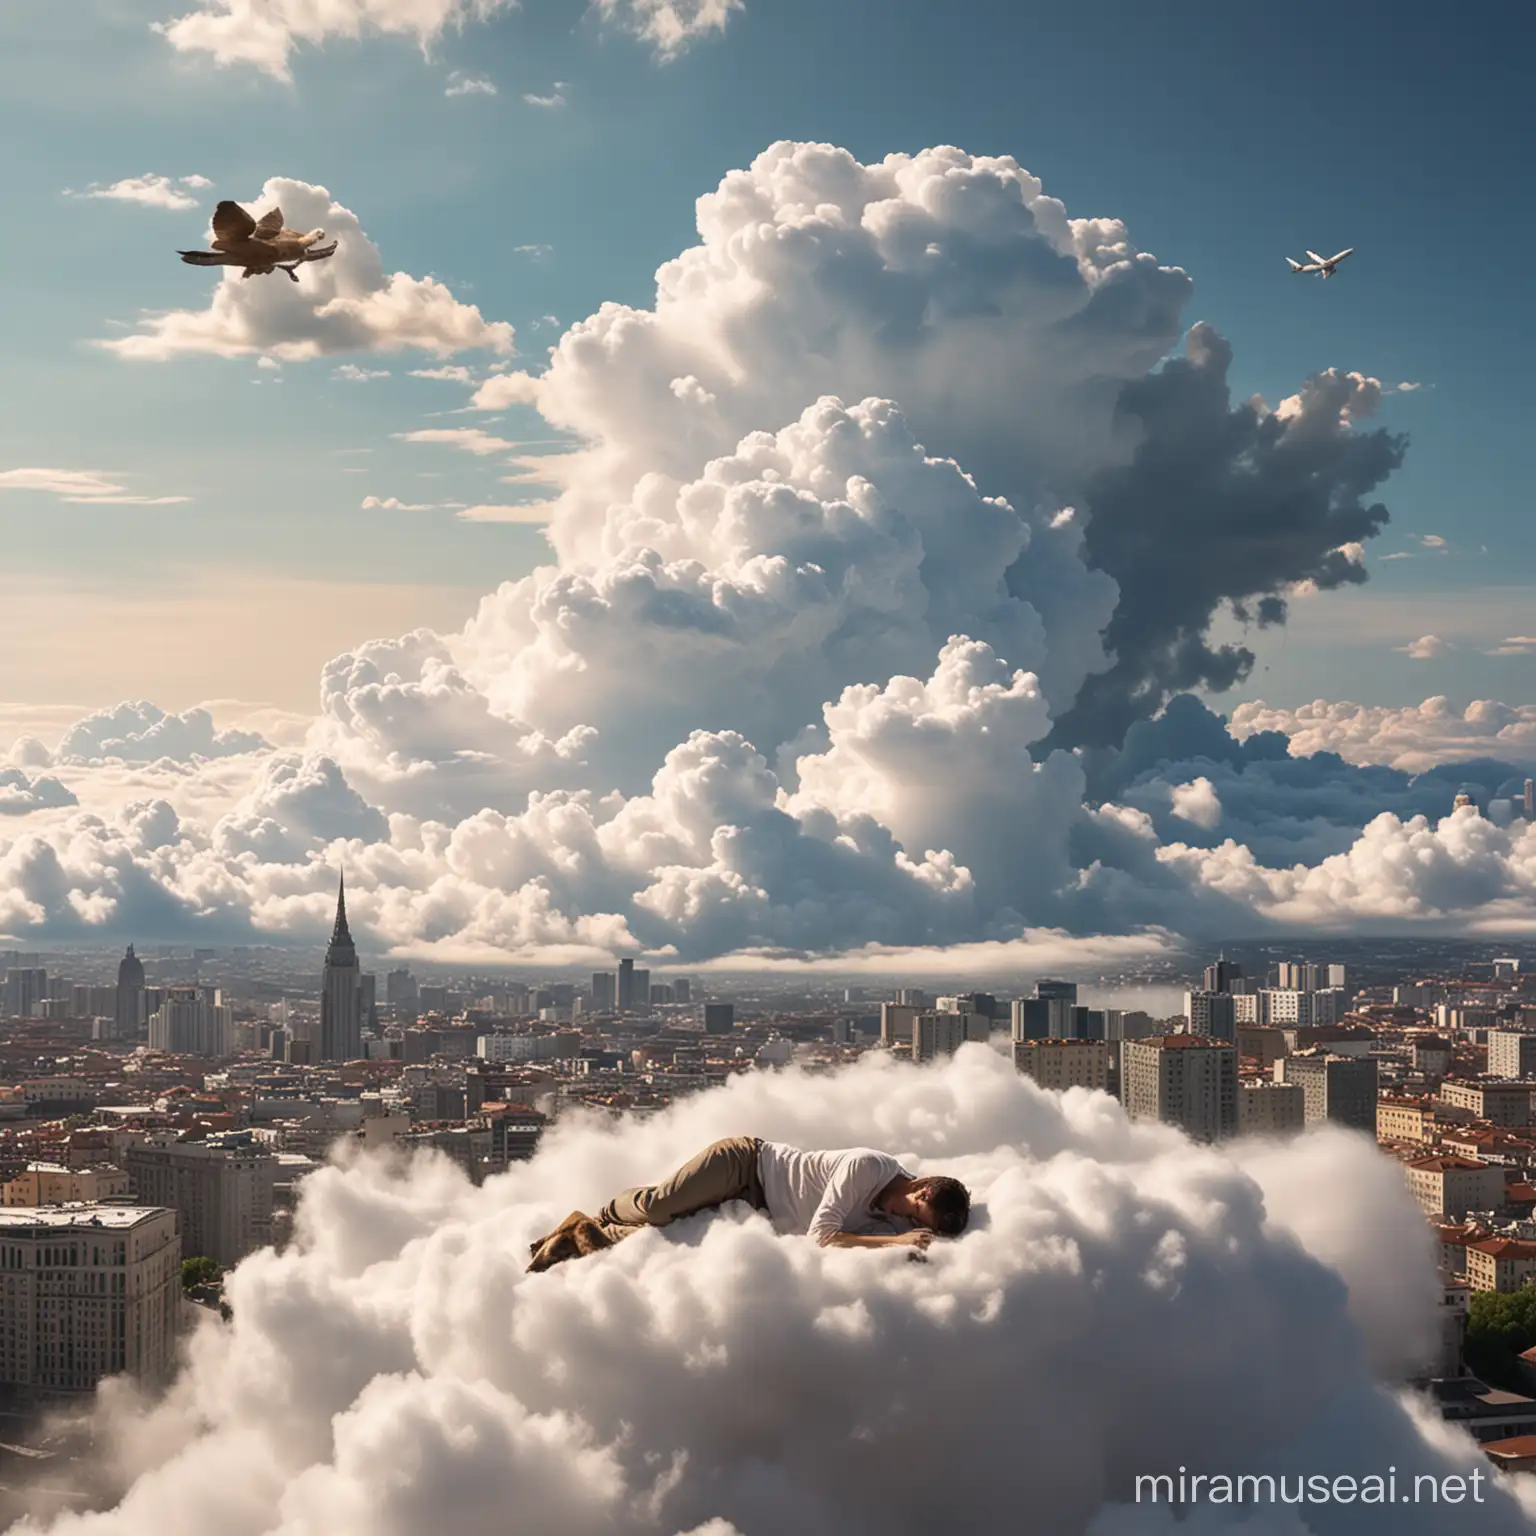 Man Sleeping on a Cloud Over Urban Landscape with Dog